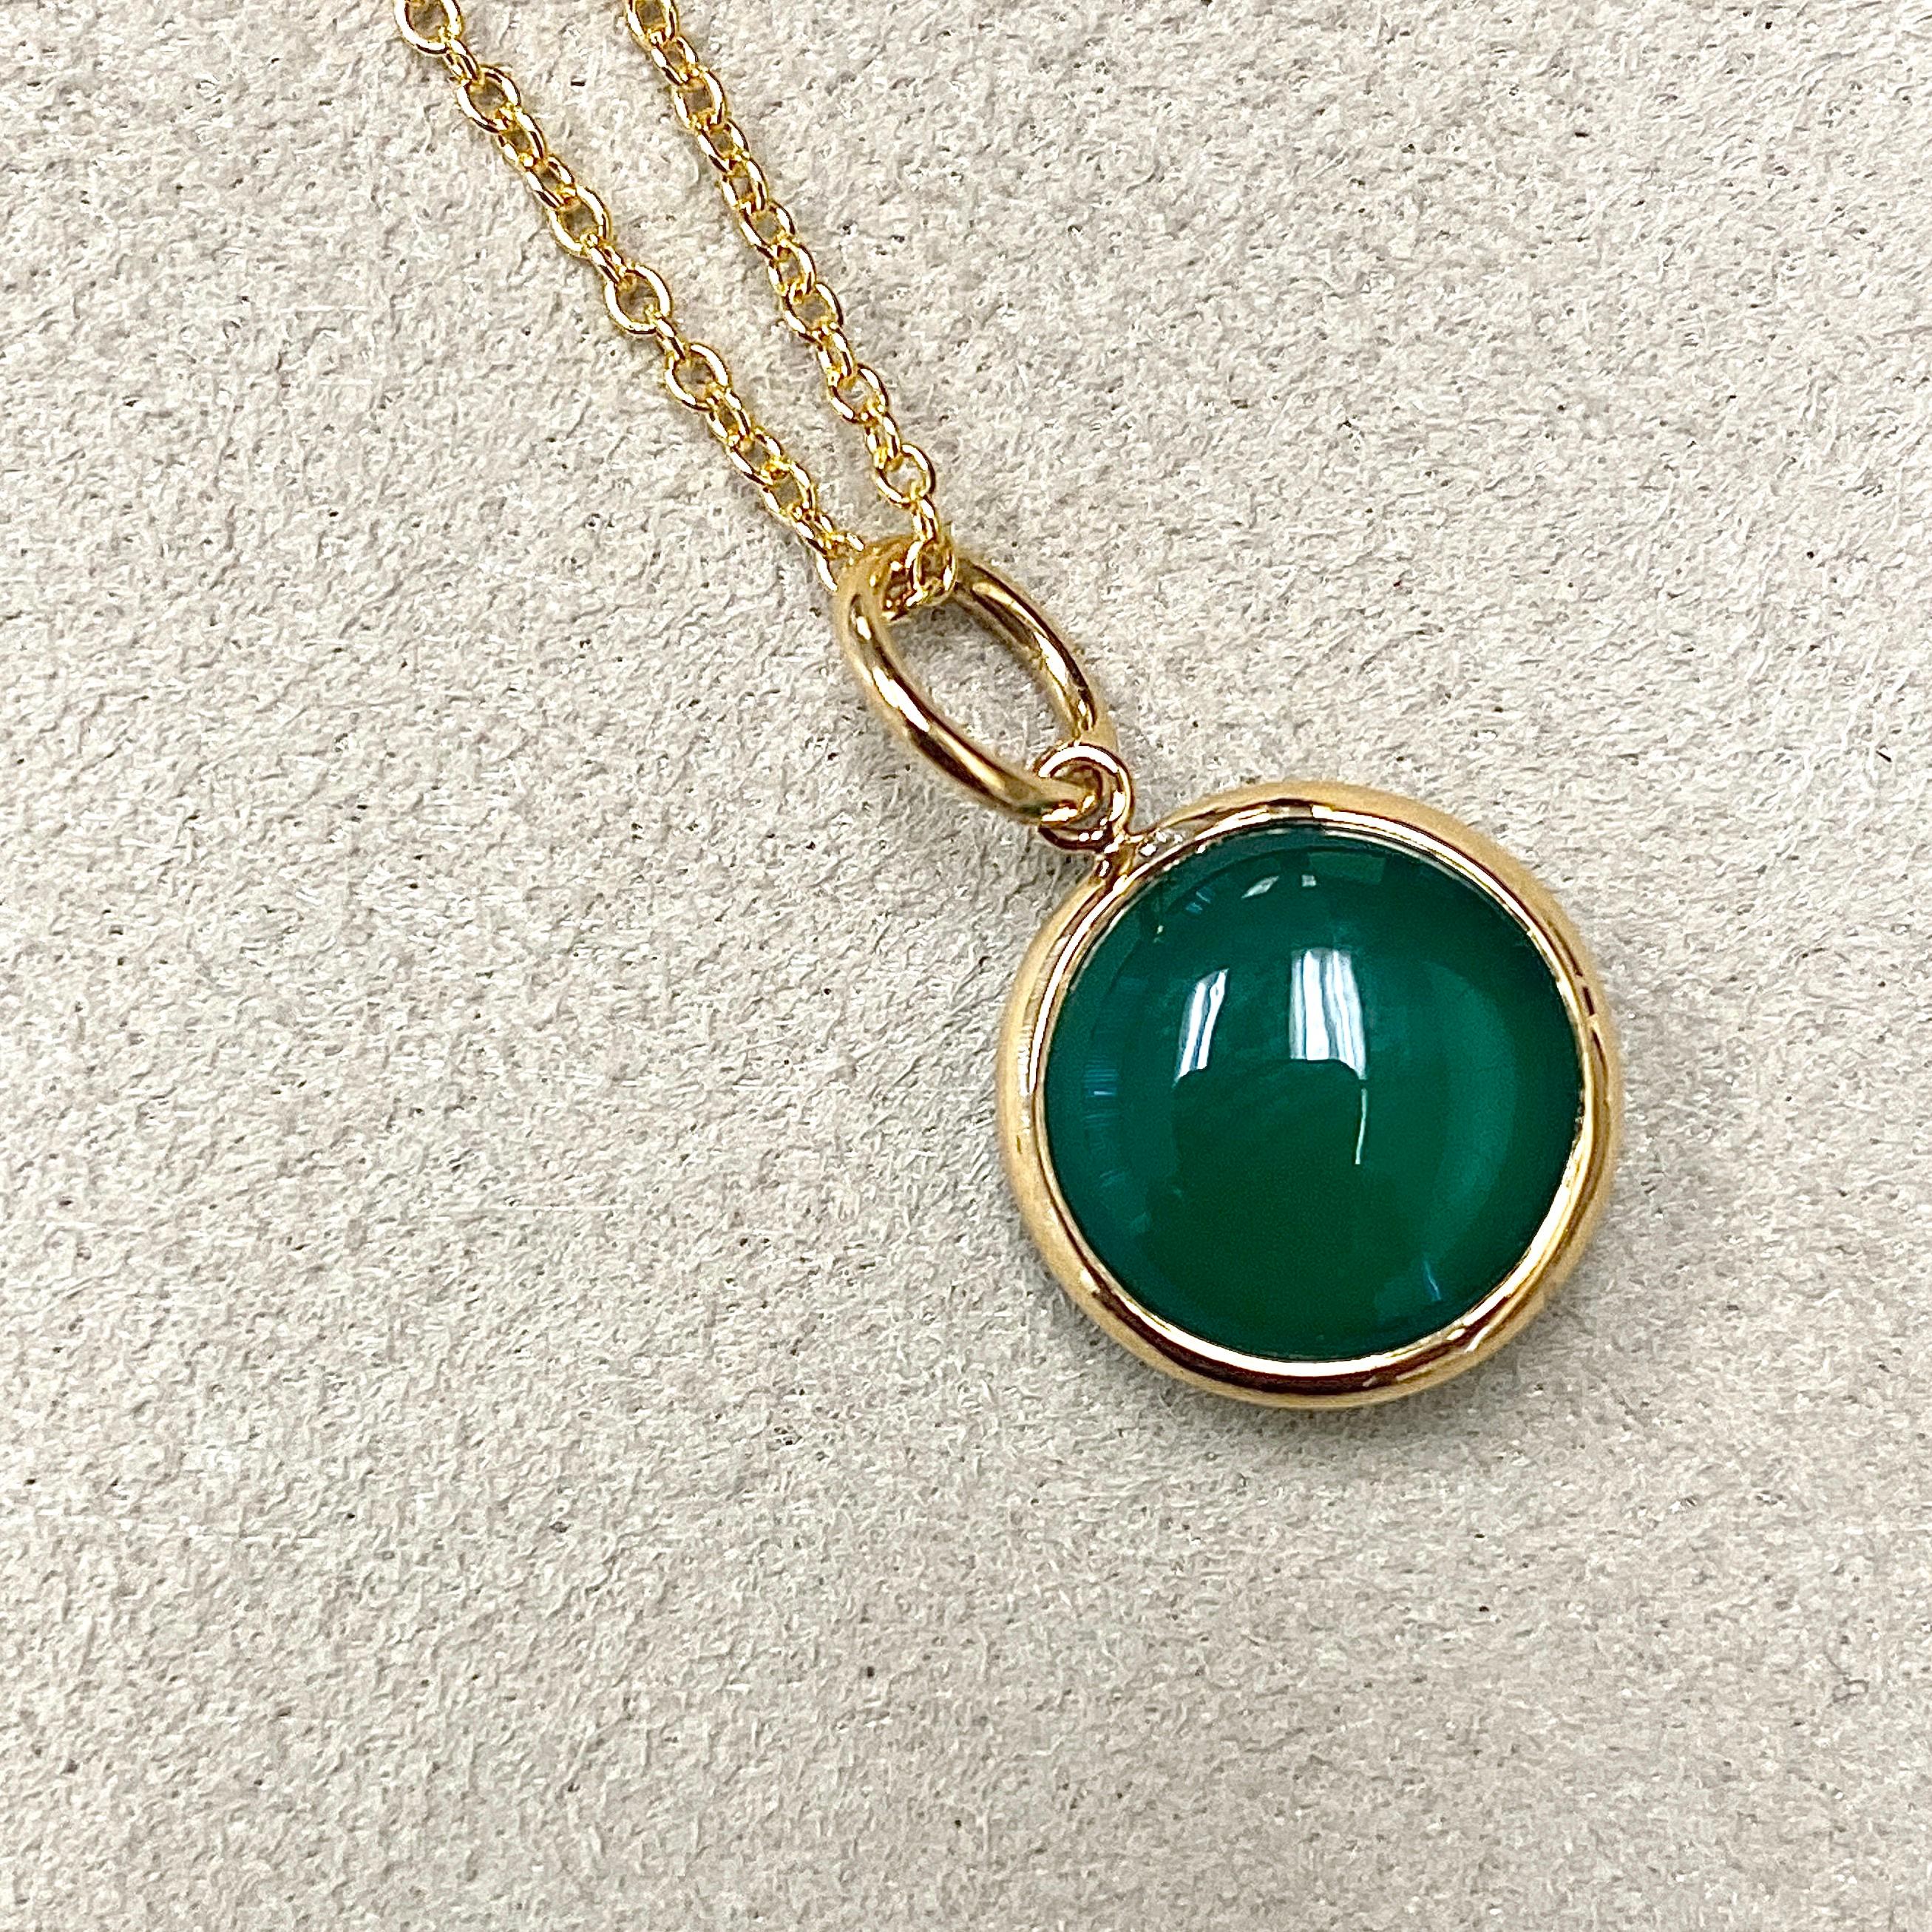 Created in 18 karat yellow gold
10 mm size charm
Green Chalcedony 3.5 cts approx
Chain sold separately 

Crafted from 18 karat yellow gold and measuring 10mm in size, this decadent pendant is adorned with a beautiful aquamarine gemstone weighing